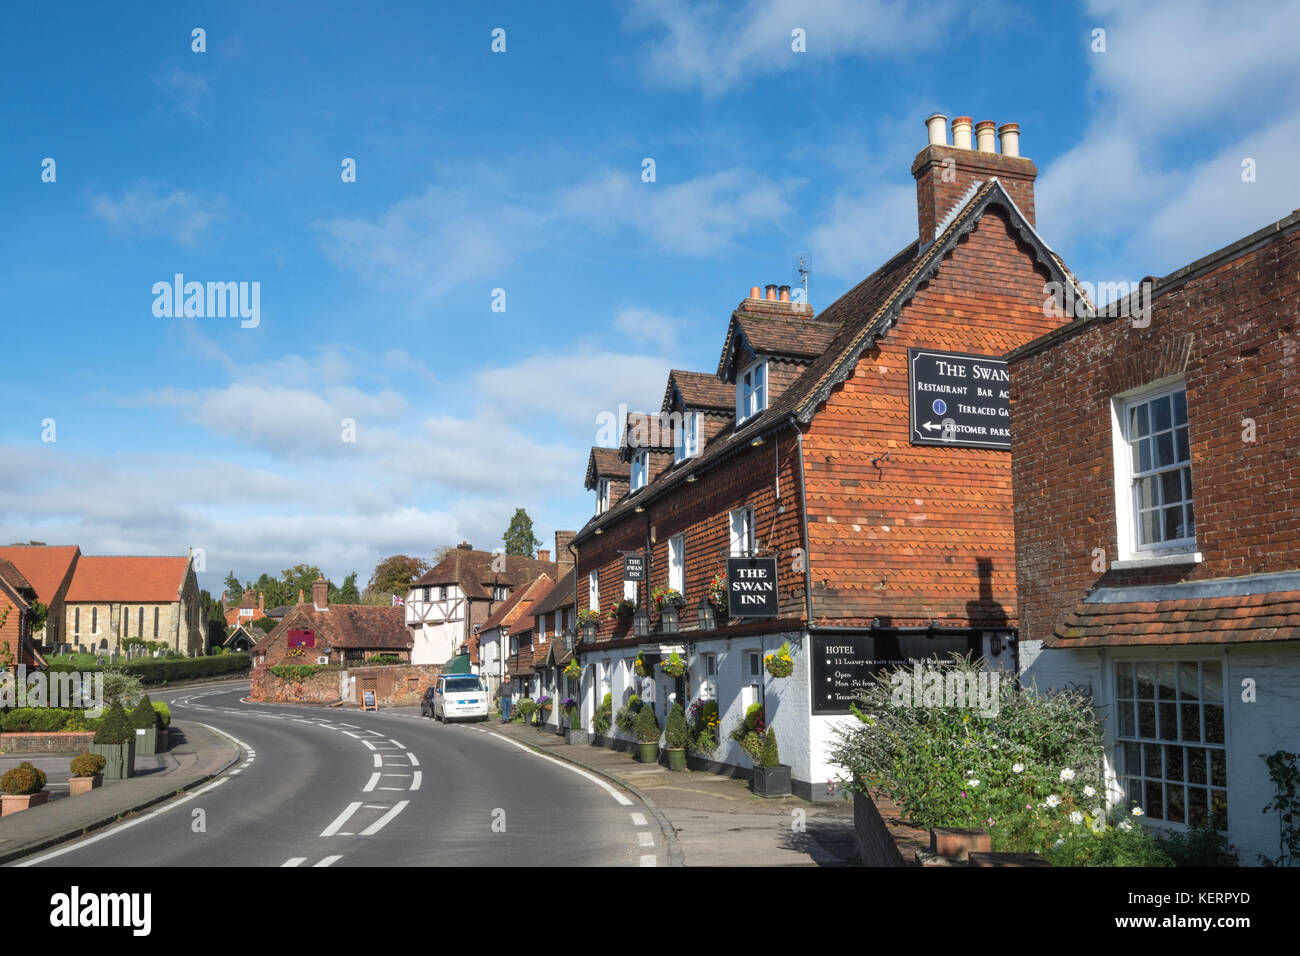 The Swan public house, St Marys church and cottages on the main street in Chiddingfold village in Surrey, UK Stock Photo